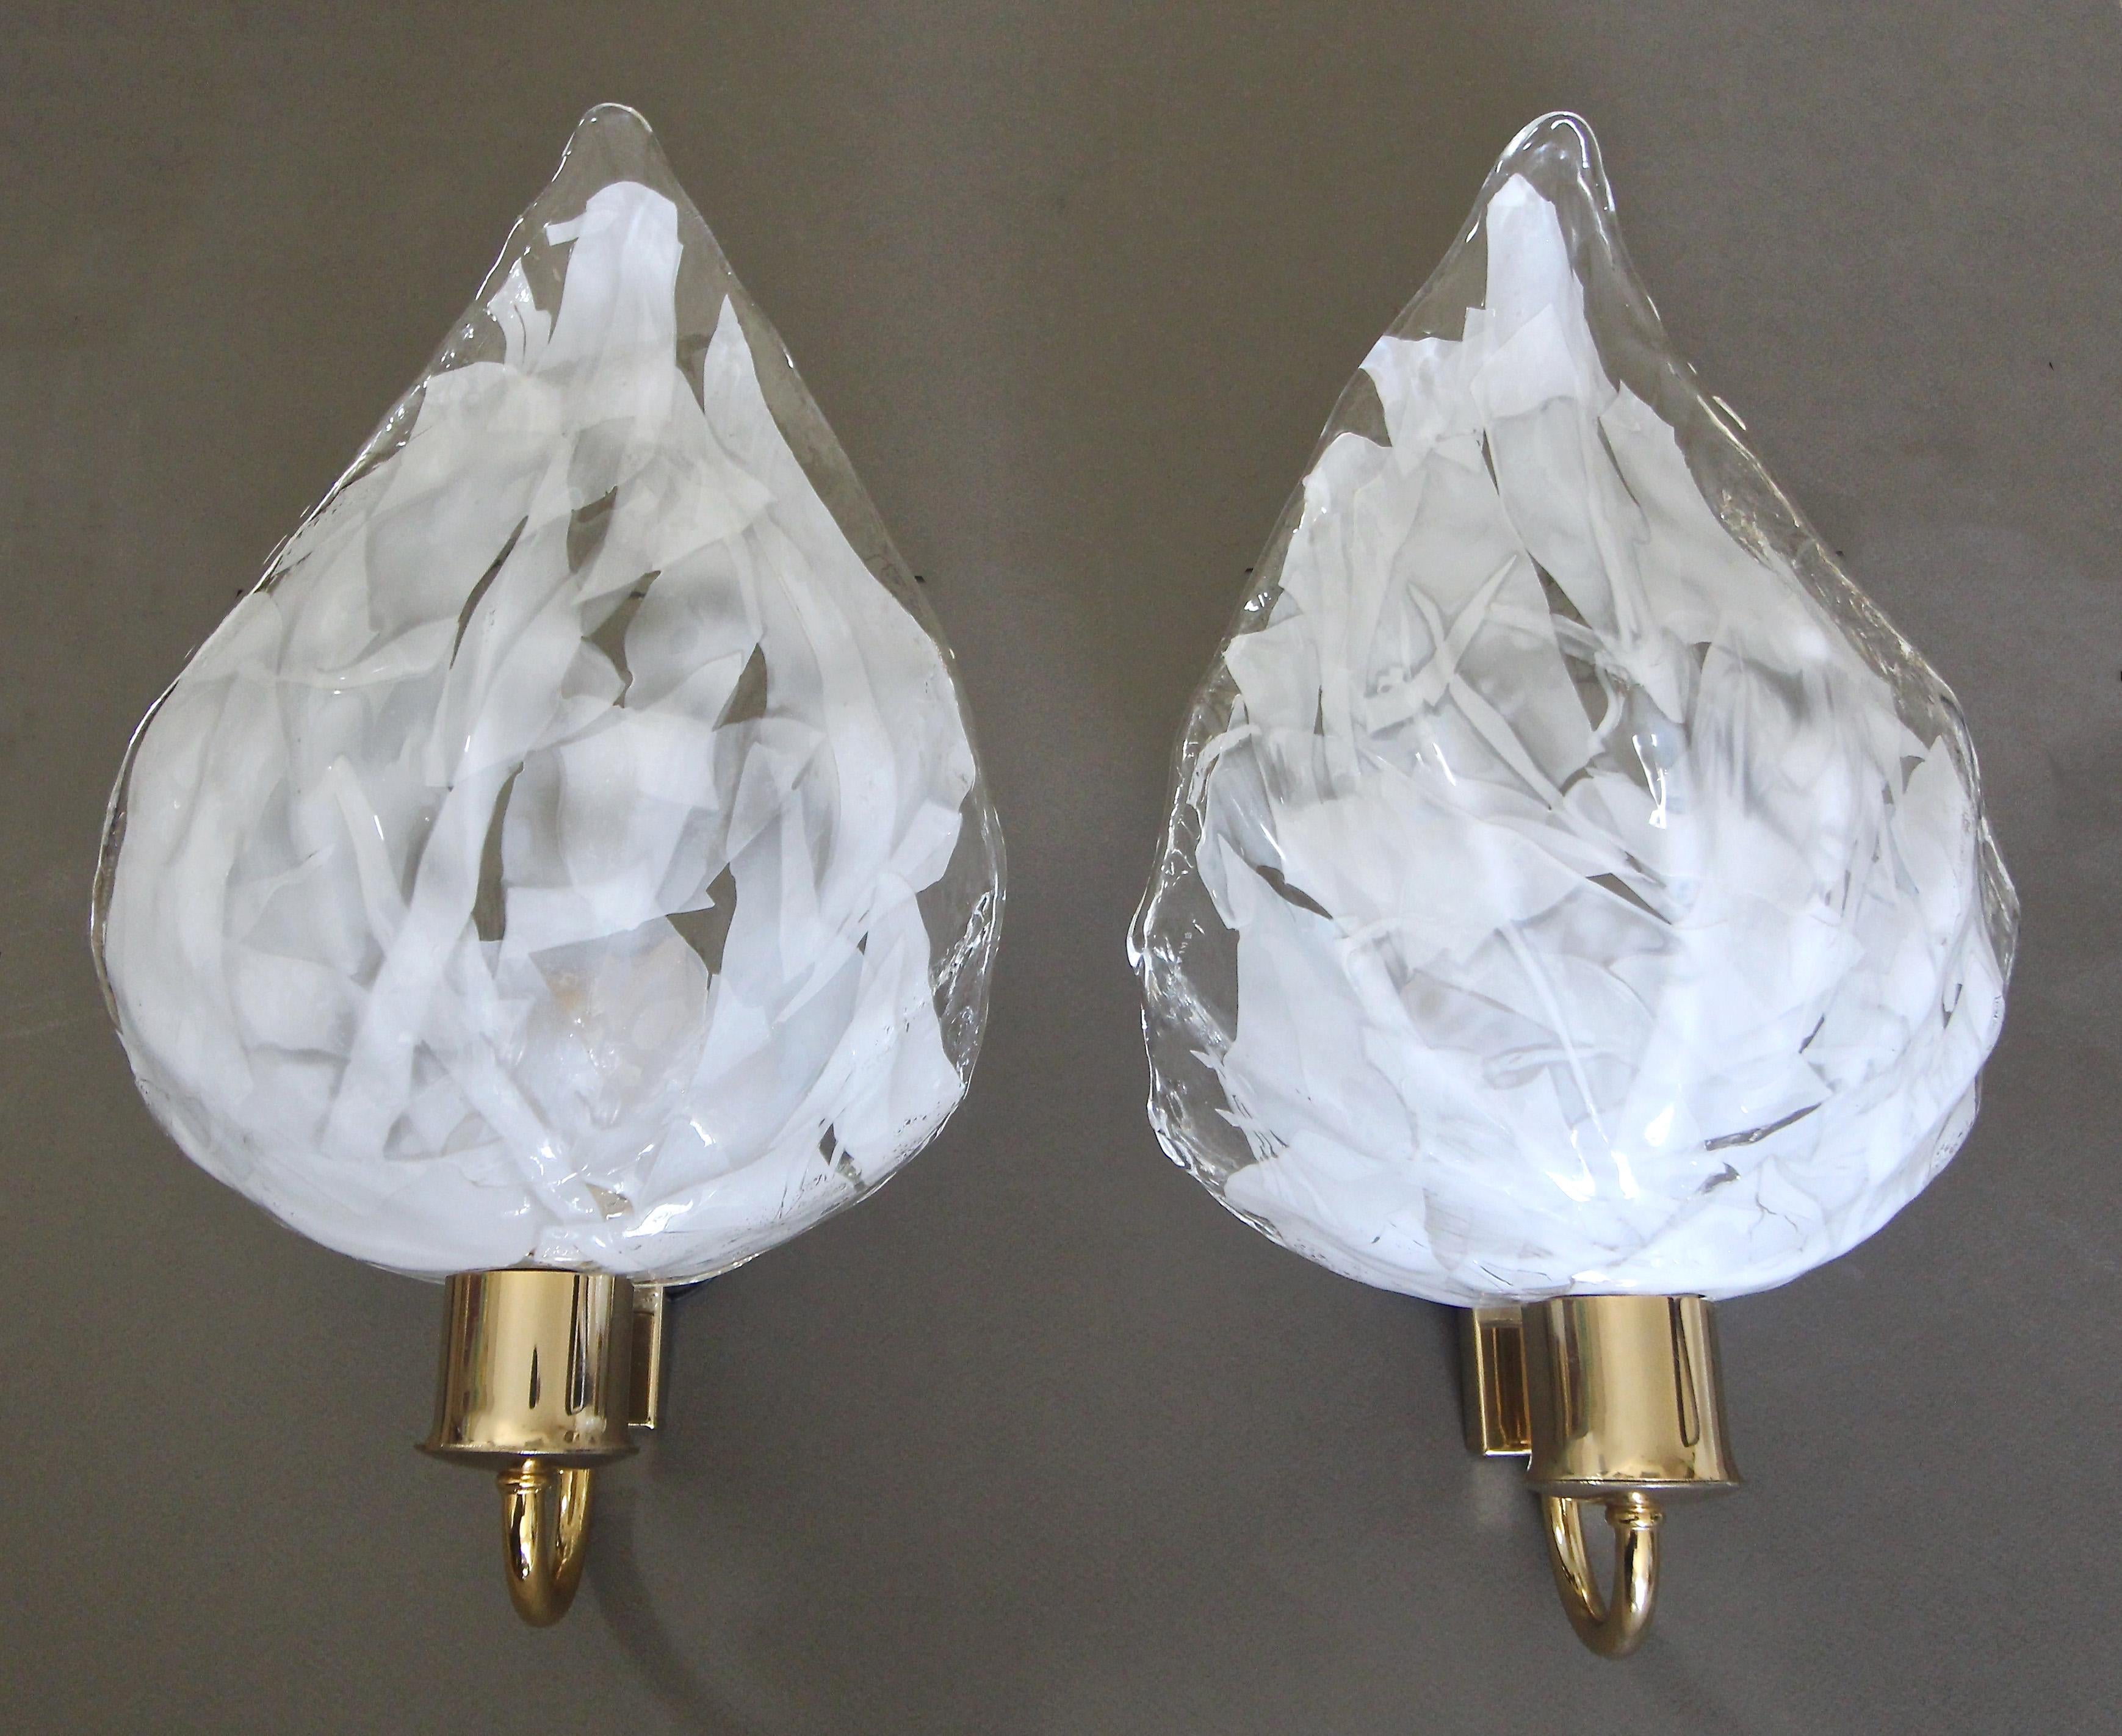 Pair of La Murrina Italian handblown clear and white leaf shaped wall sconces mounted on brass wall plates. Newly wired for the US. Each uses a single A or Edison base bulb. (White junction box cover included, see photo.) 

Measures:
Glass alone